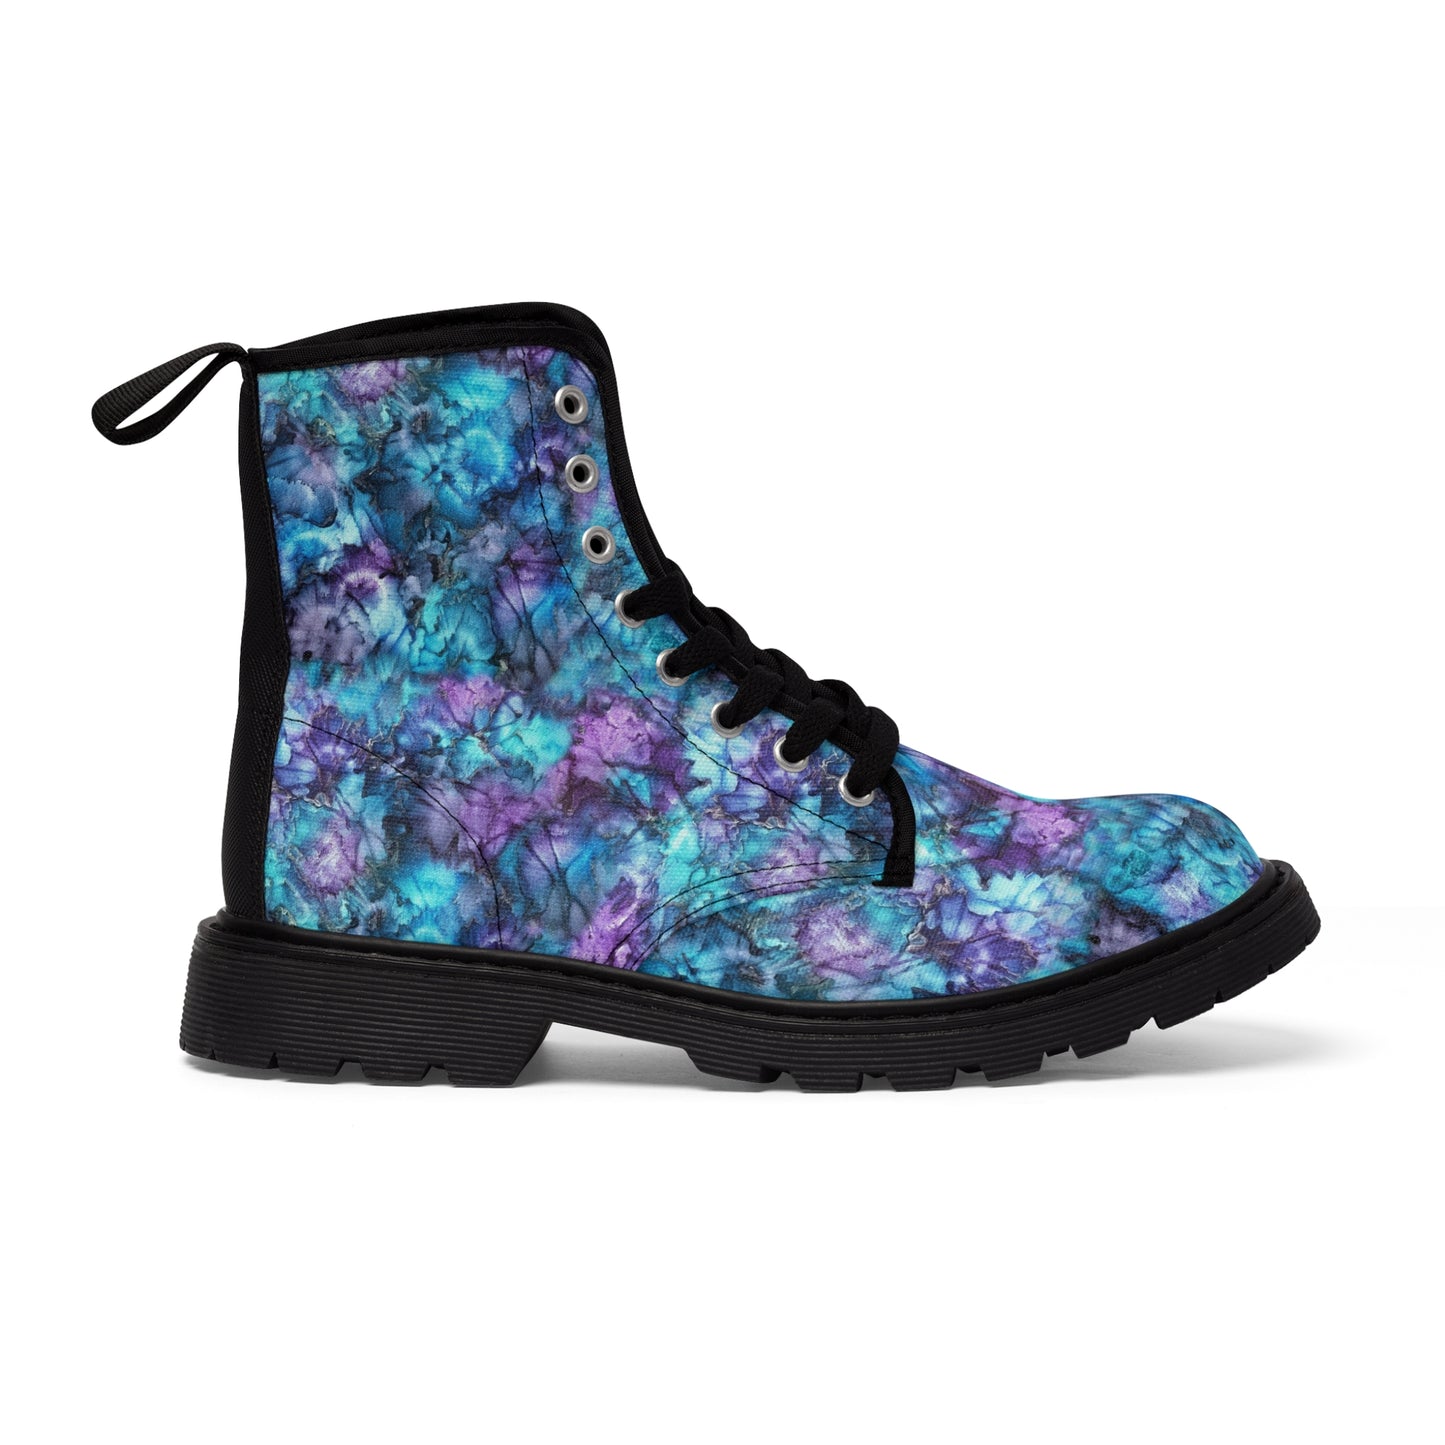 Just Breathe Women's Fashion Boots